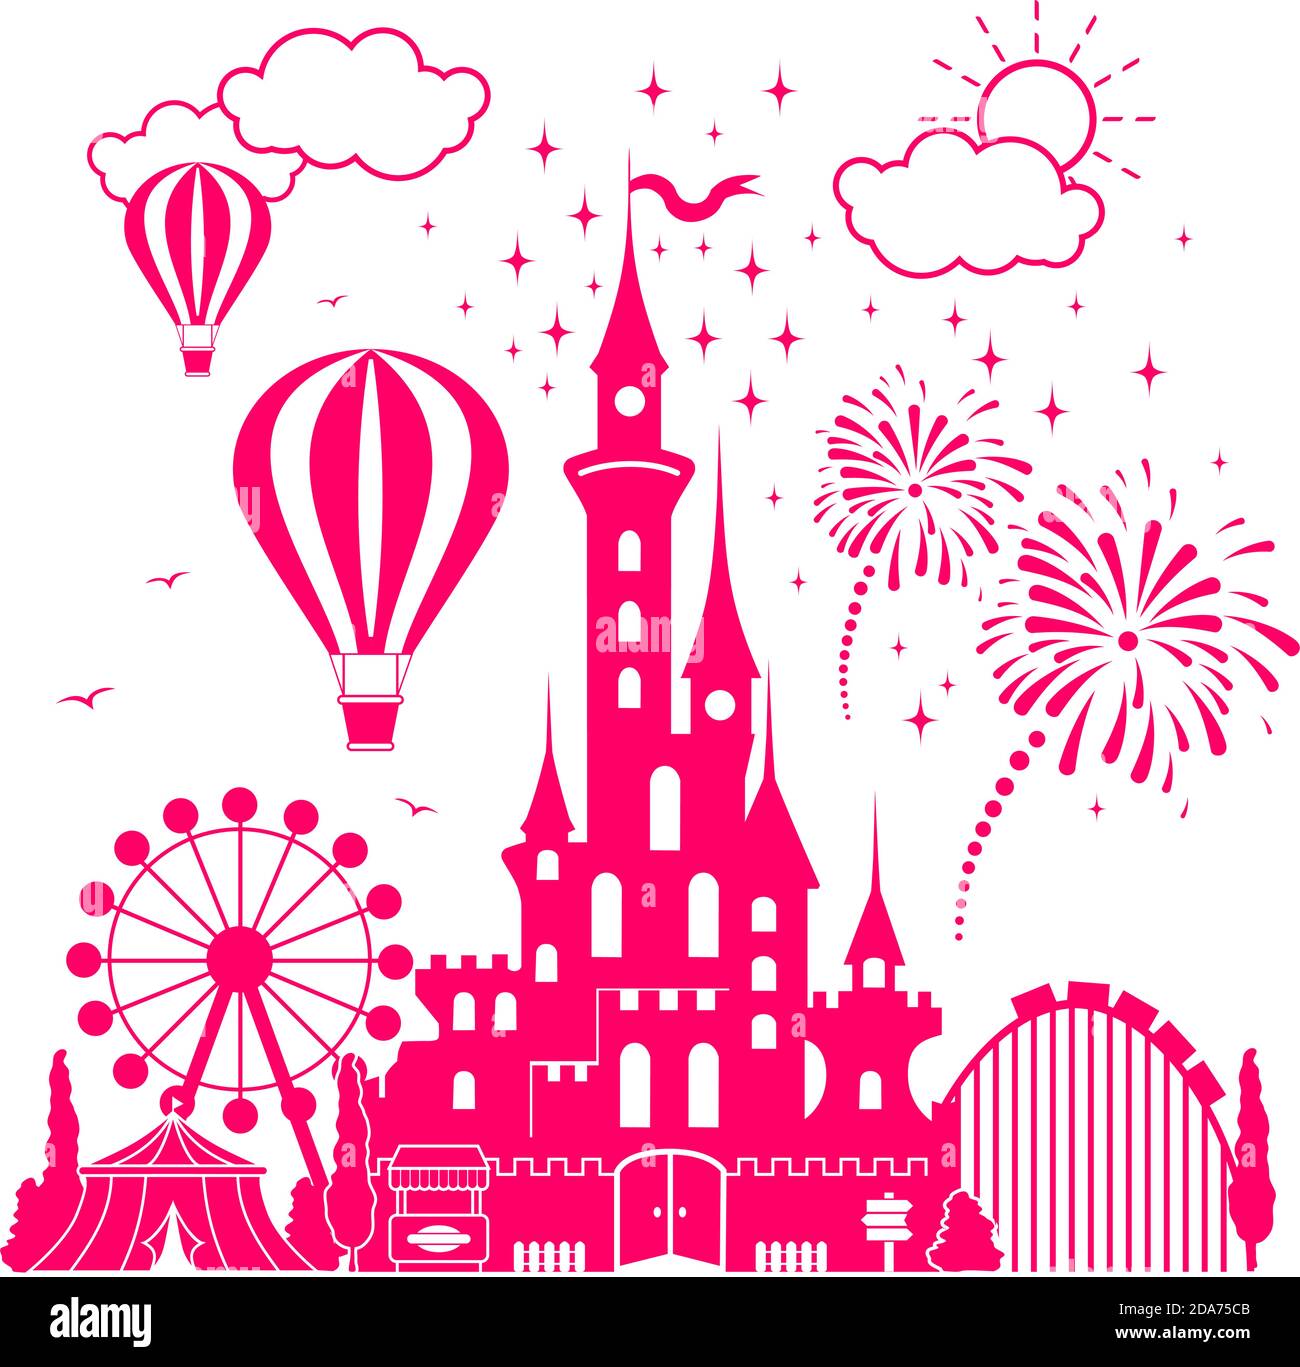 Fairytale castle of princess in an amusement park. Air balloons in sky, rides and entertainment. Illustration, vector Stock Vector